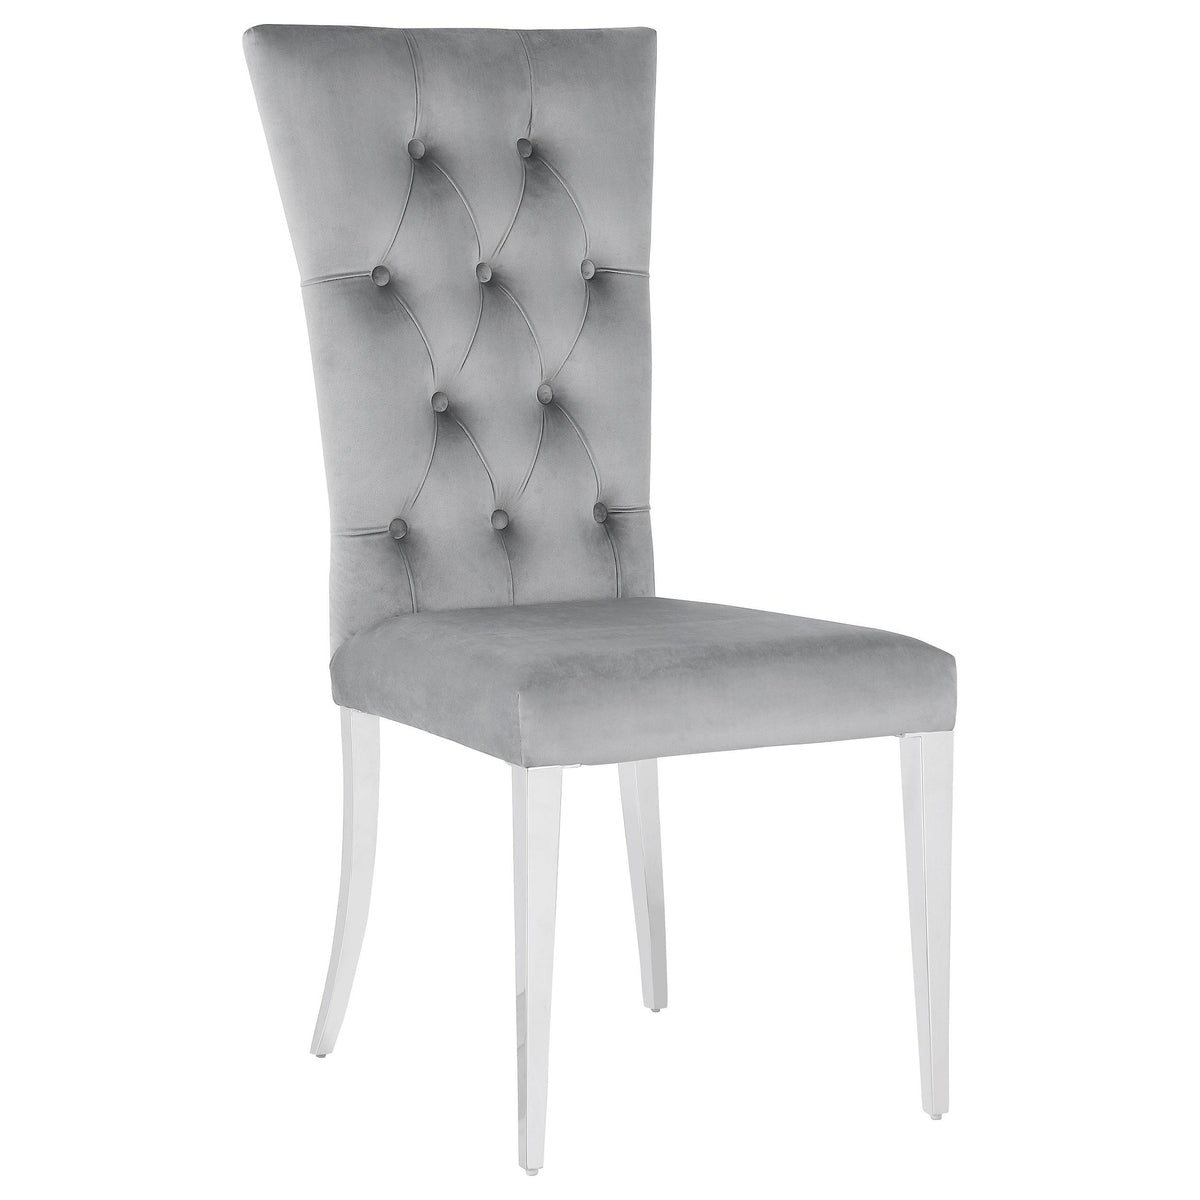 Kerwin Tufted Upholstered Side Chair (Set Of 2)  Las Vegas Furniture Stores